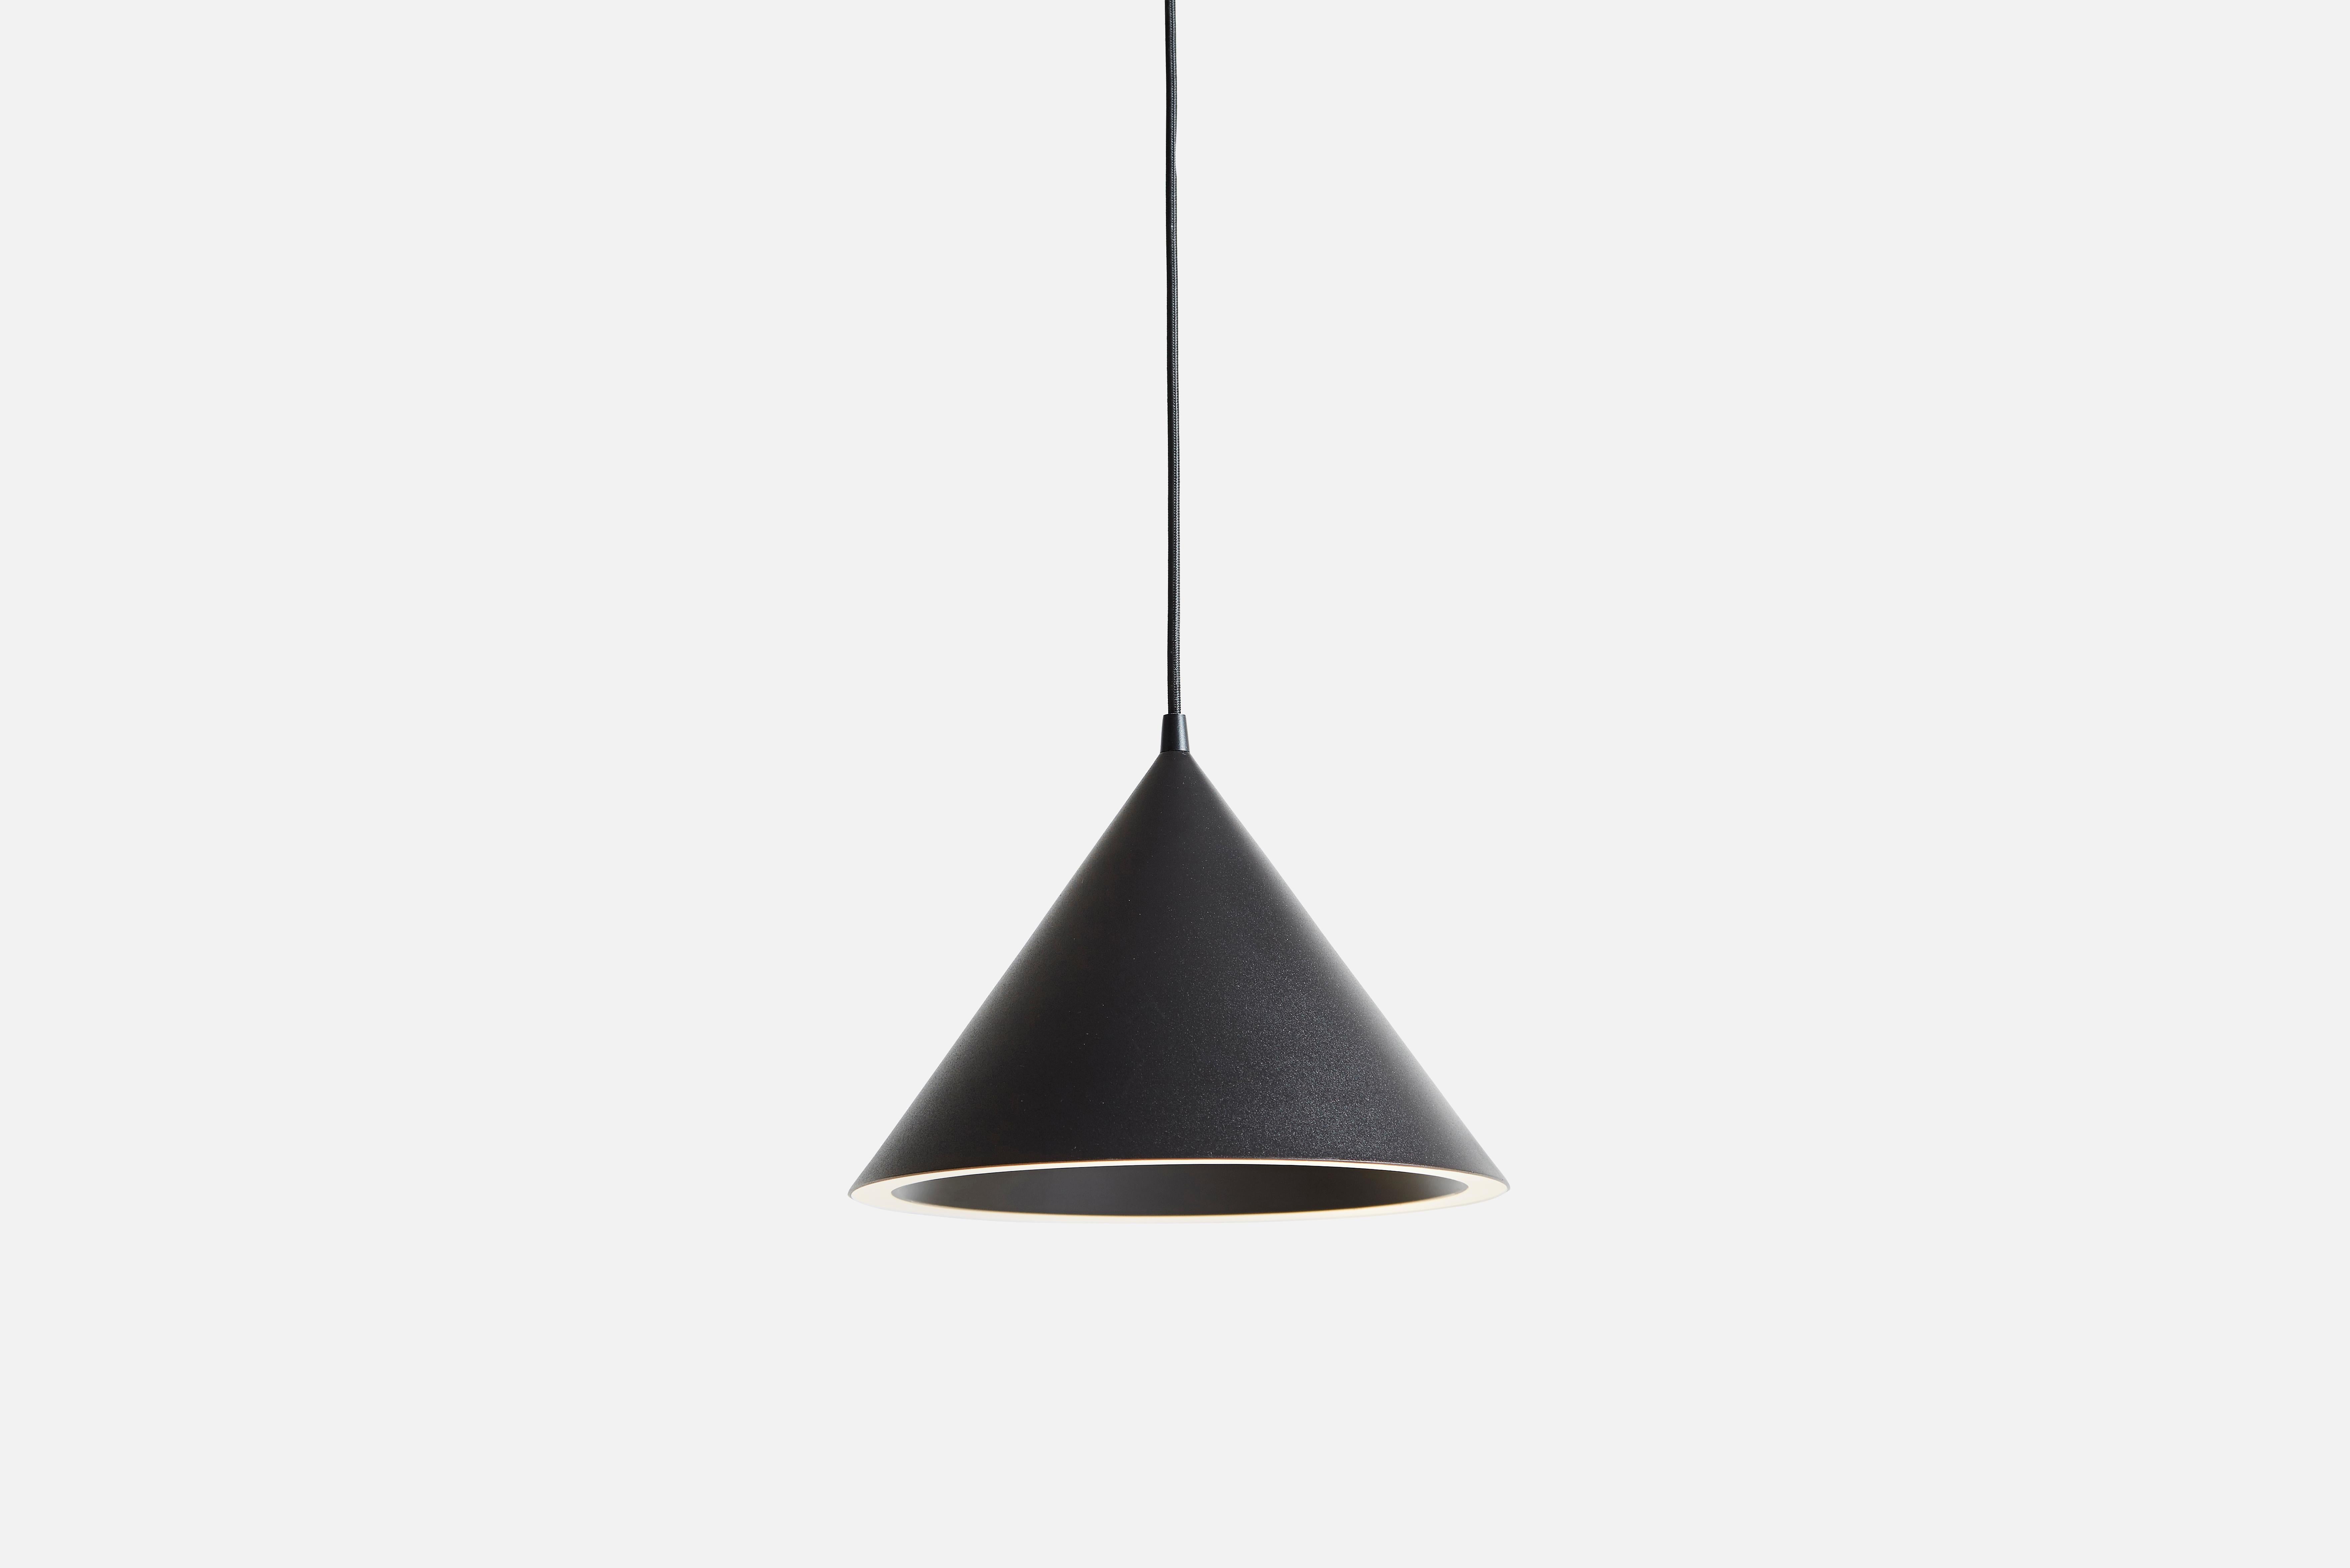 Small black Annular pendant lamp by MSDS Studio
Materials: Aluminum.
Dimensions: D 32 x H 23.8 cm
Available in white, nude, mint, black.
Available in 2 sizes: D32, D46.8 cm.

MSDS STUDIO is a successful Canadian design studio that works in